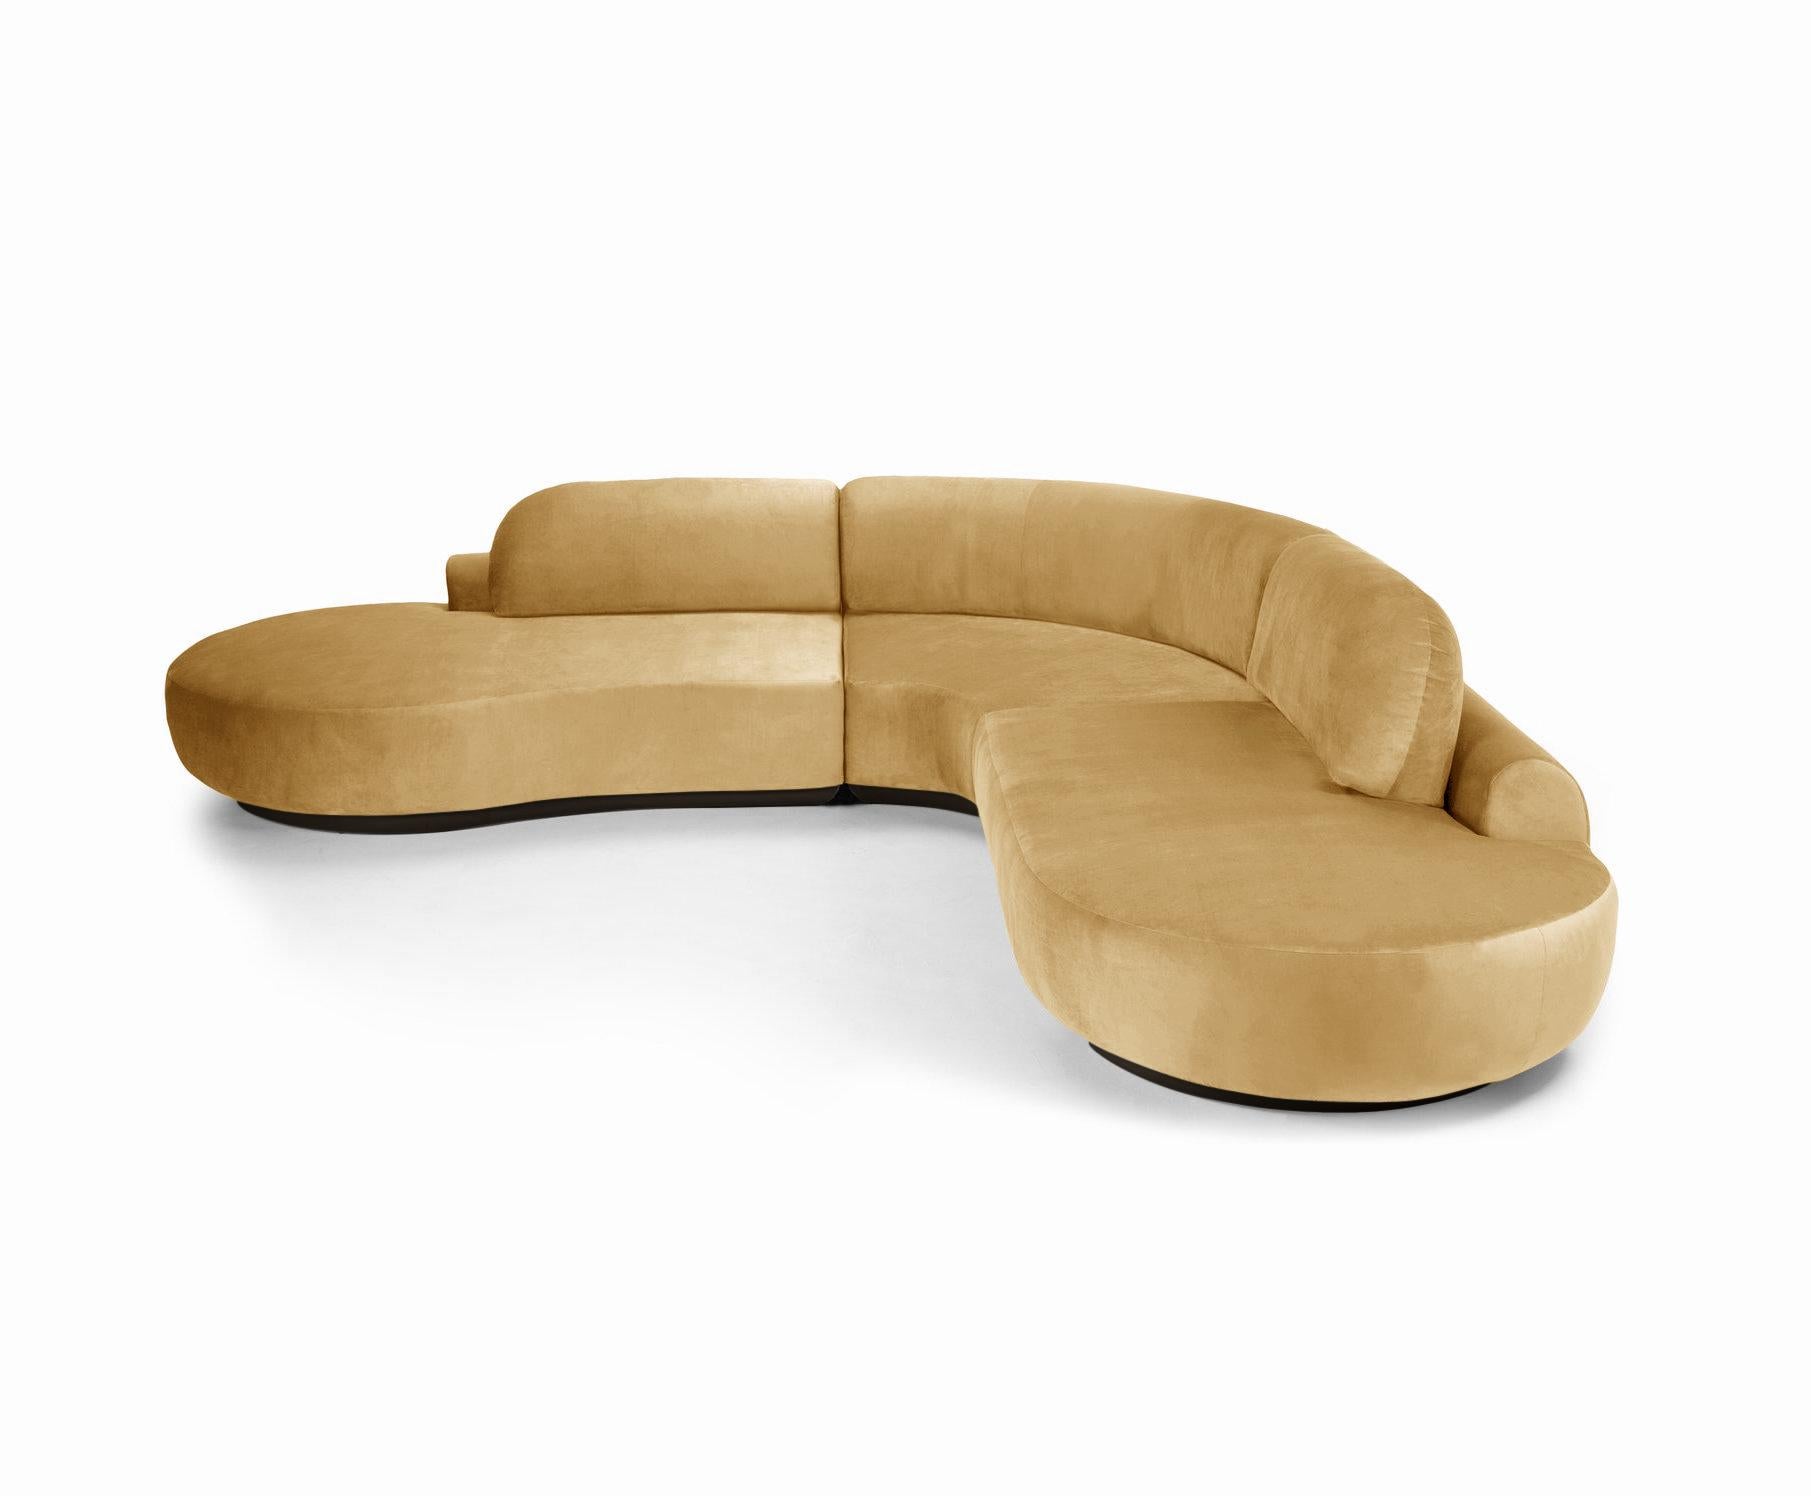 The Naked Sectional Sofa is a modular sofa with inviting curves and a comfortable seating. Handmade with a solid wood base. The Naked Sectional Sofa is available in a number of different materials, finishes and combinations.

Material

Top : velvet